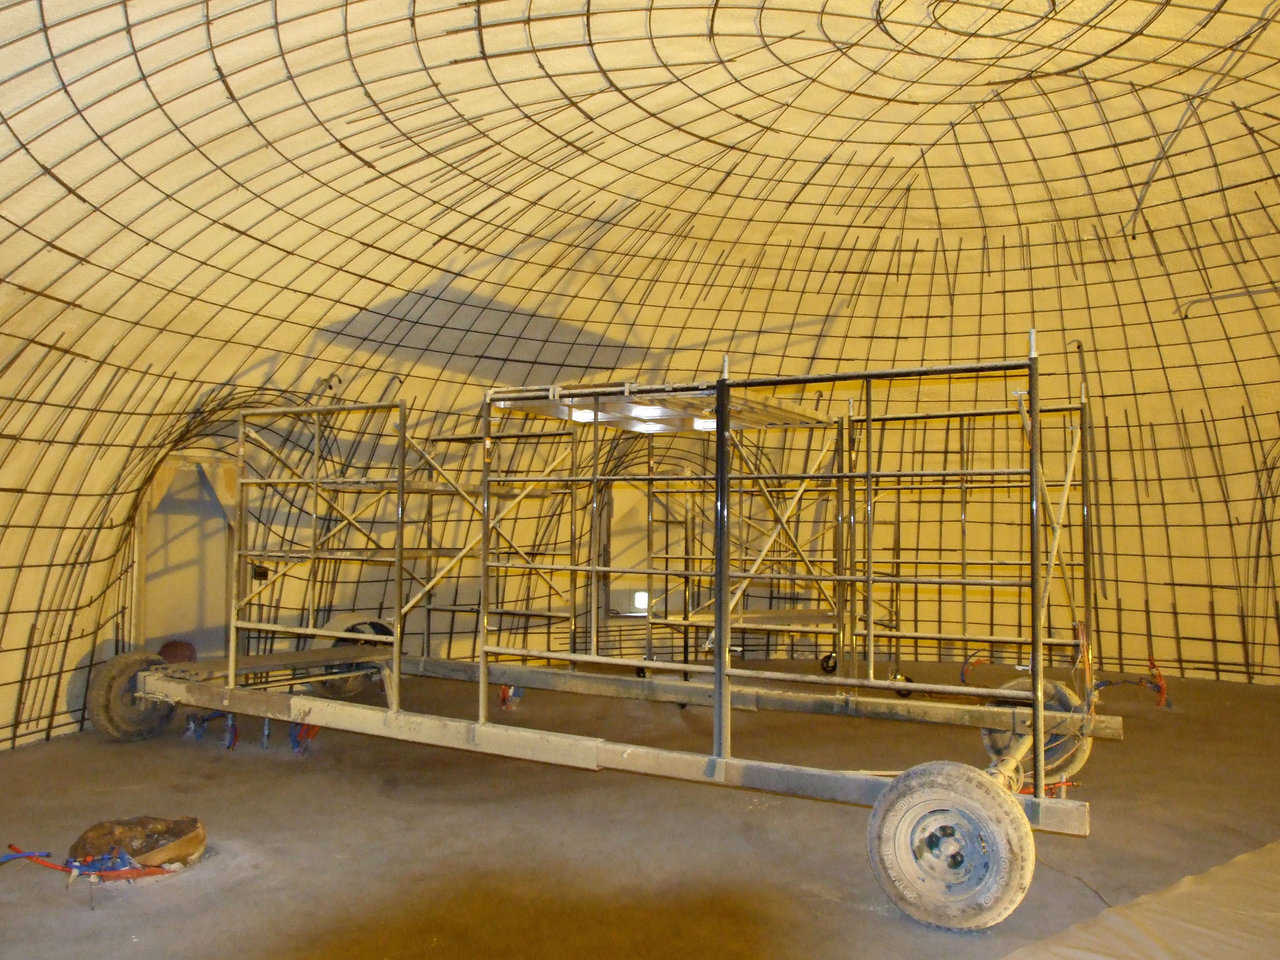 Paxis Scaffold — The Paxis scaffold is the best scaffolding for dome structures.  It can be adjusted to build any size dome and will keep your applicators in the right spraying position, in a nice constant speed around the dome.